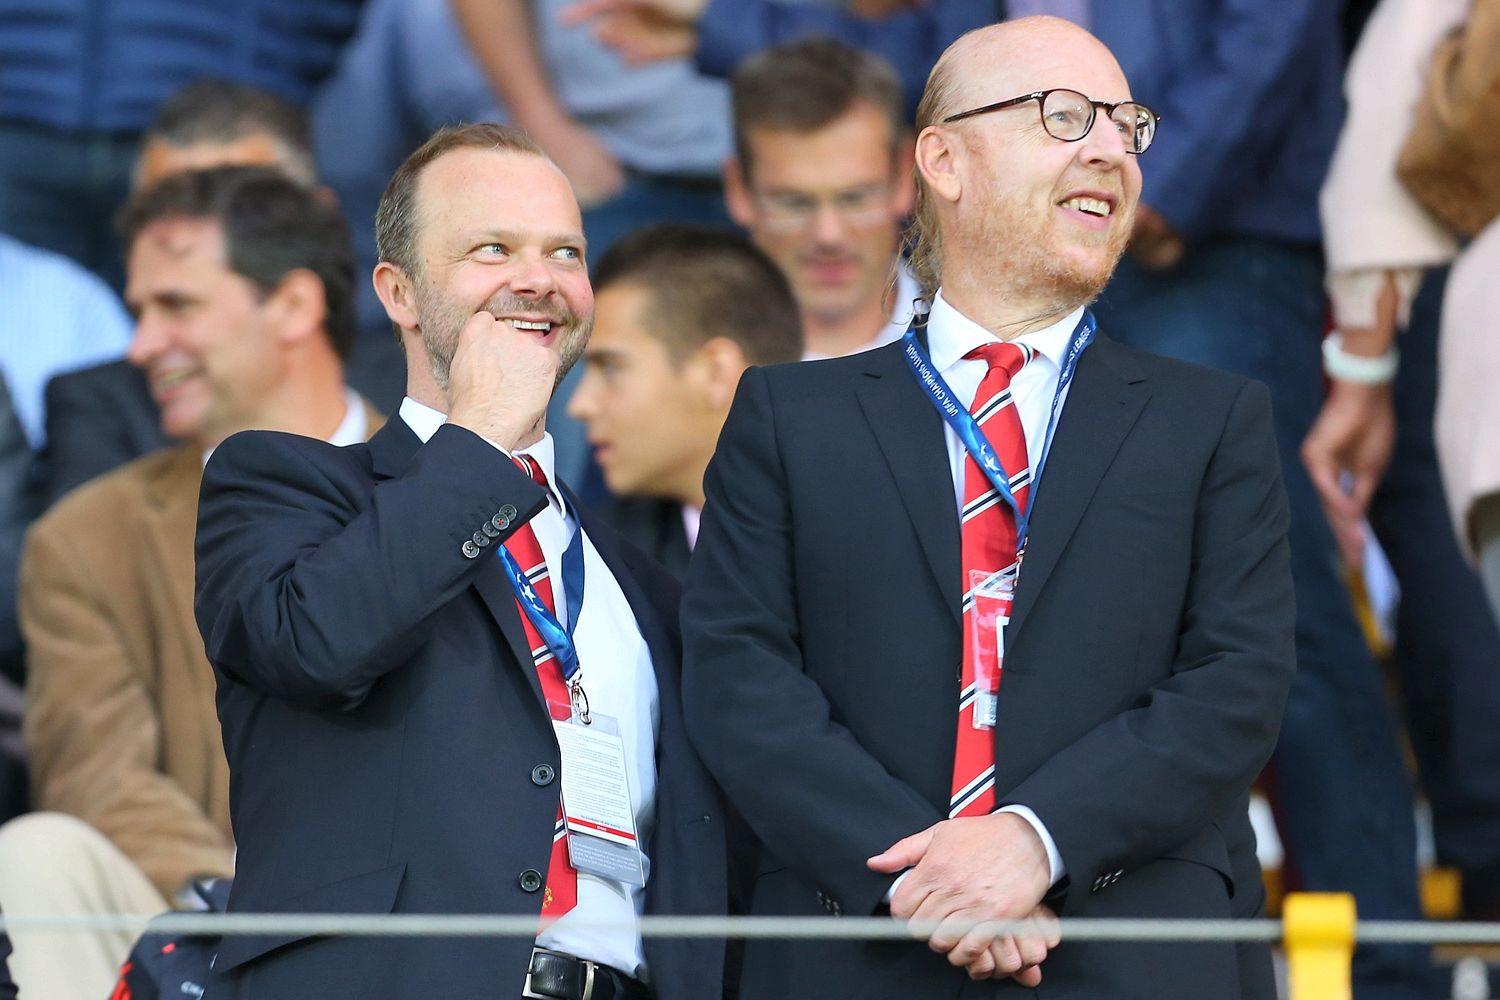 Explained: Everything you needed to know about The Glazers, Manchester United's billionaire owners